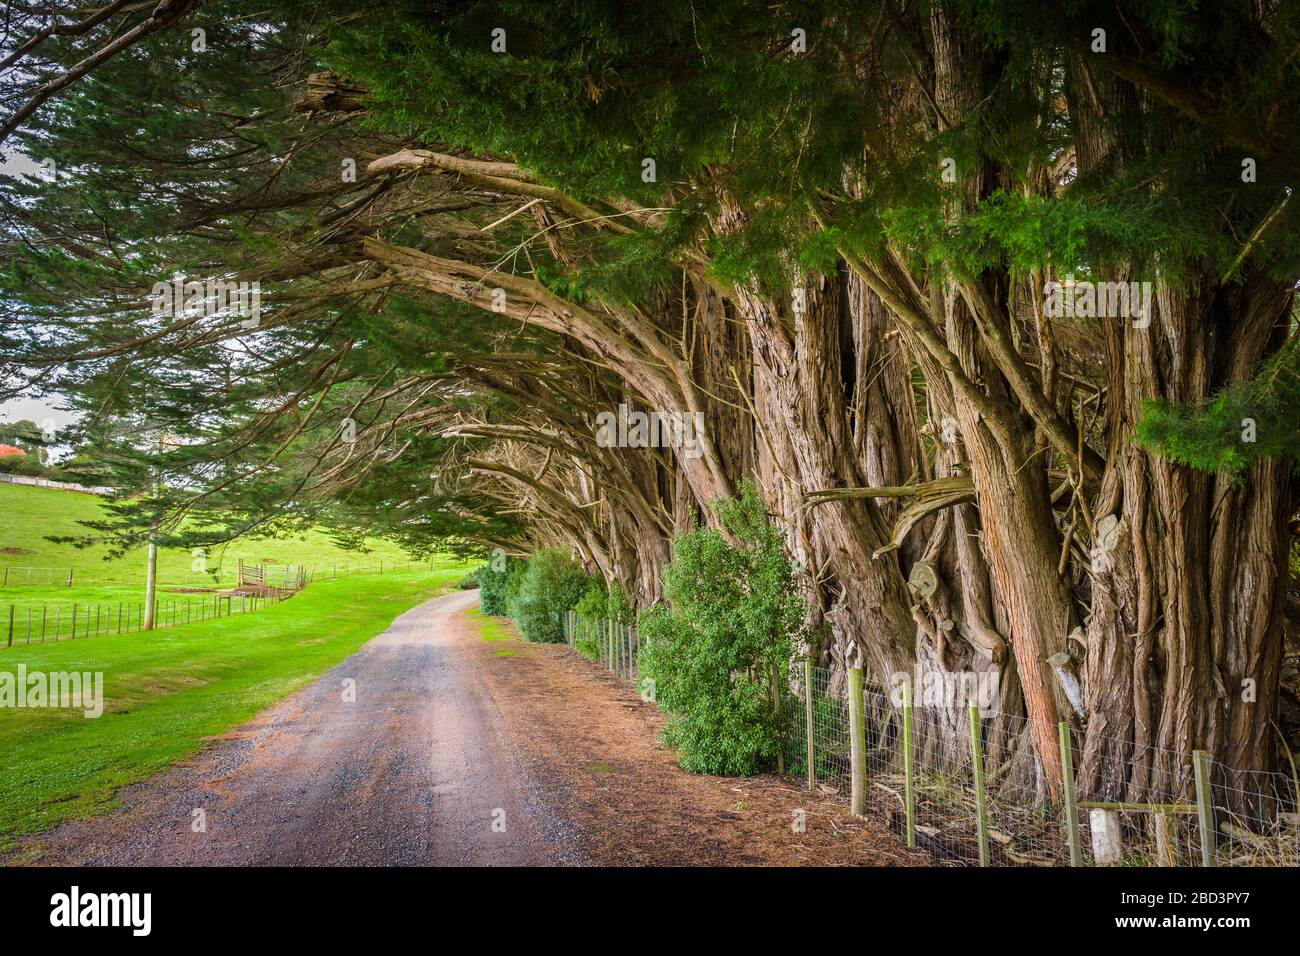 Tree Shaded Lane High Resolution Stock Photography and Images - Alamy